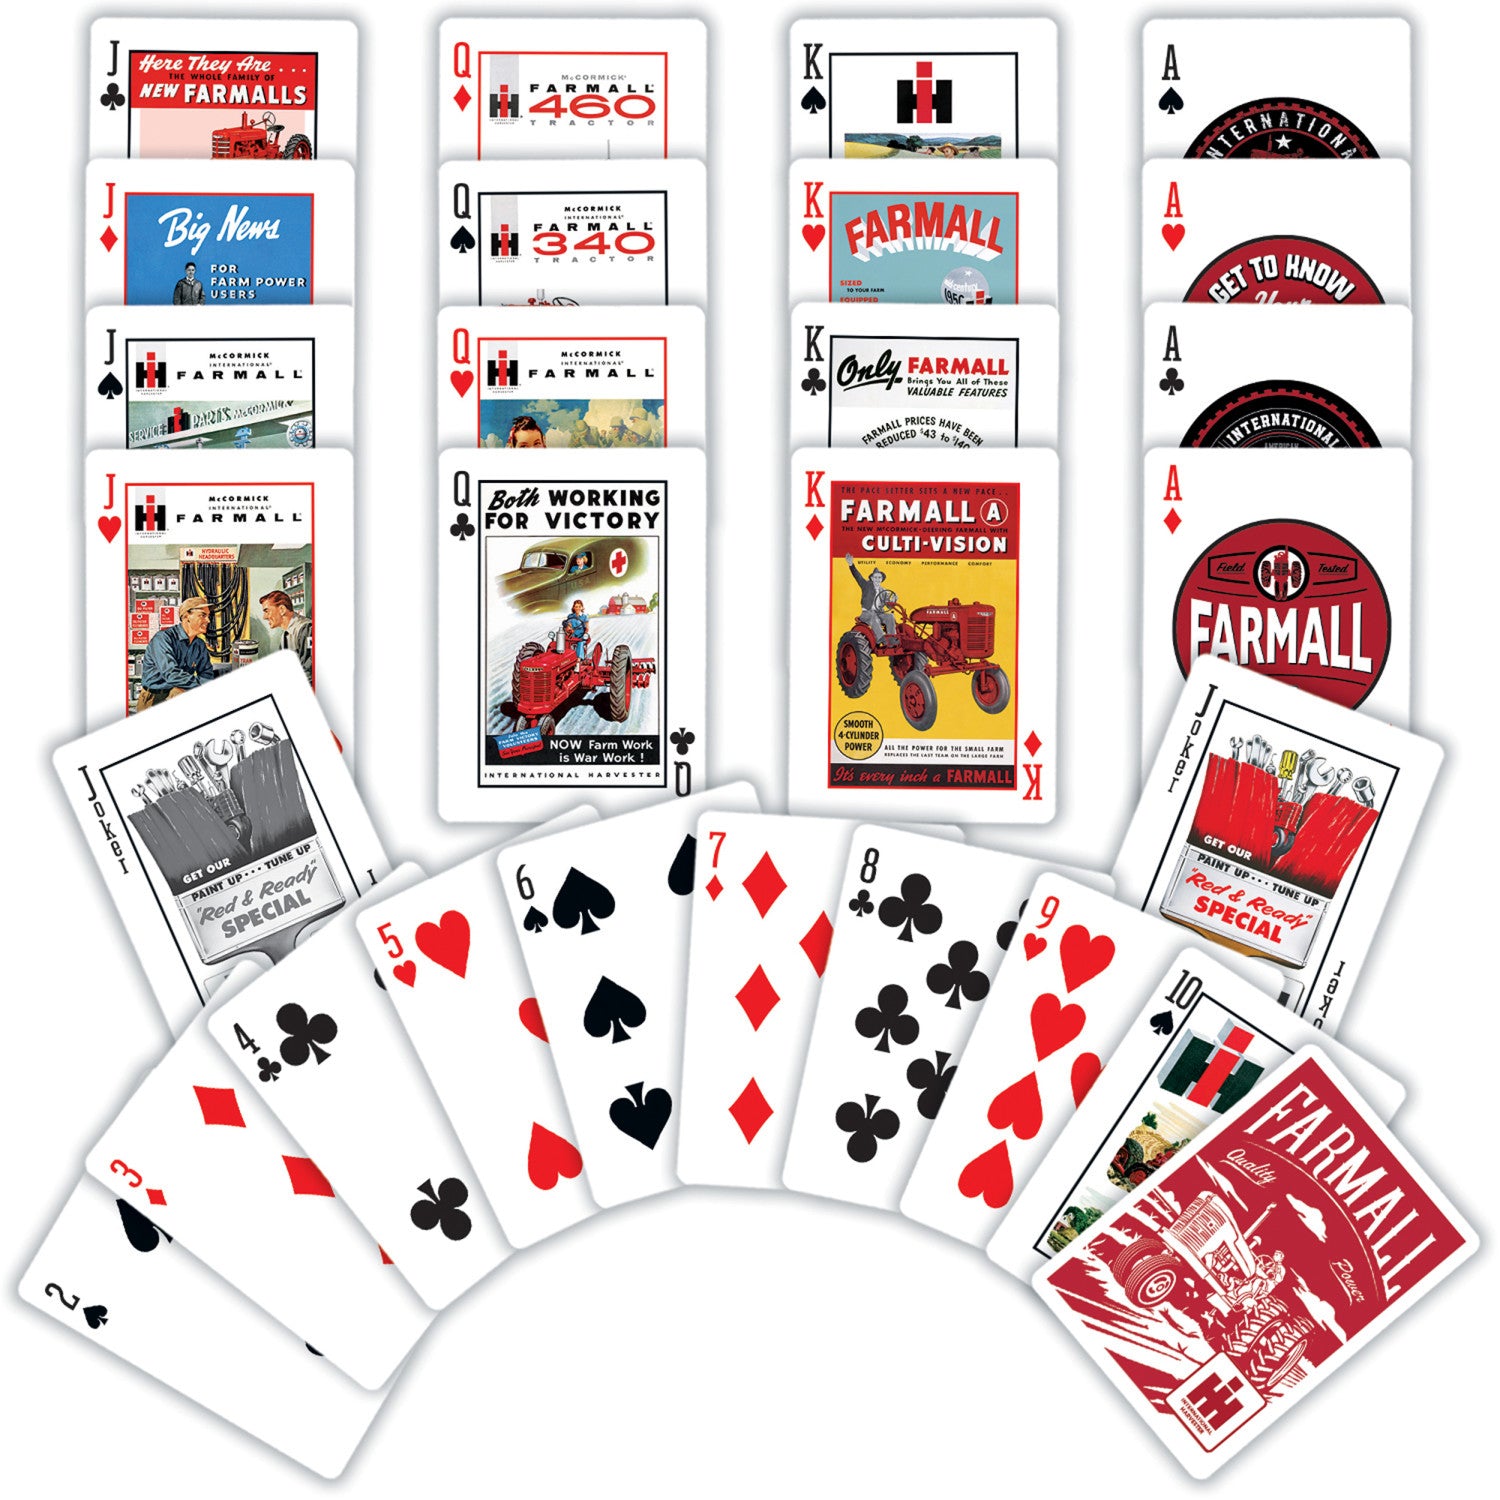 Case IH/Farmall Playing Cards